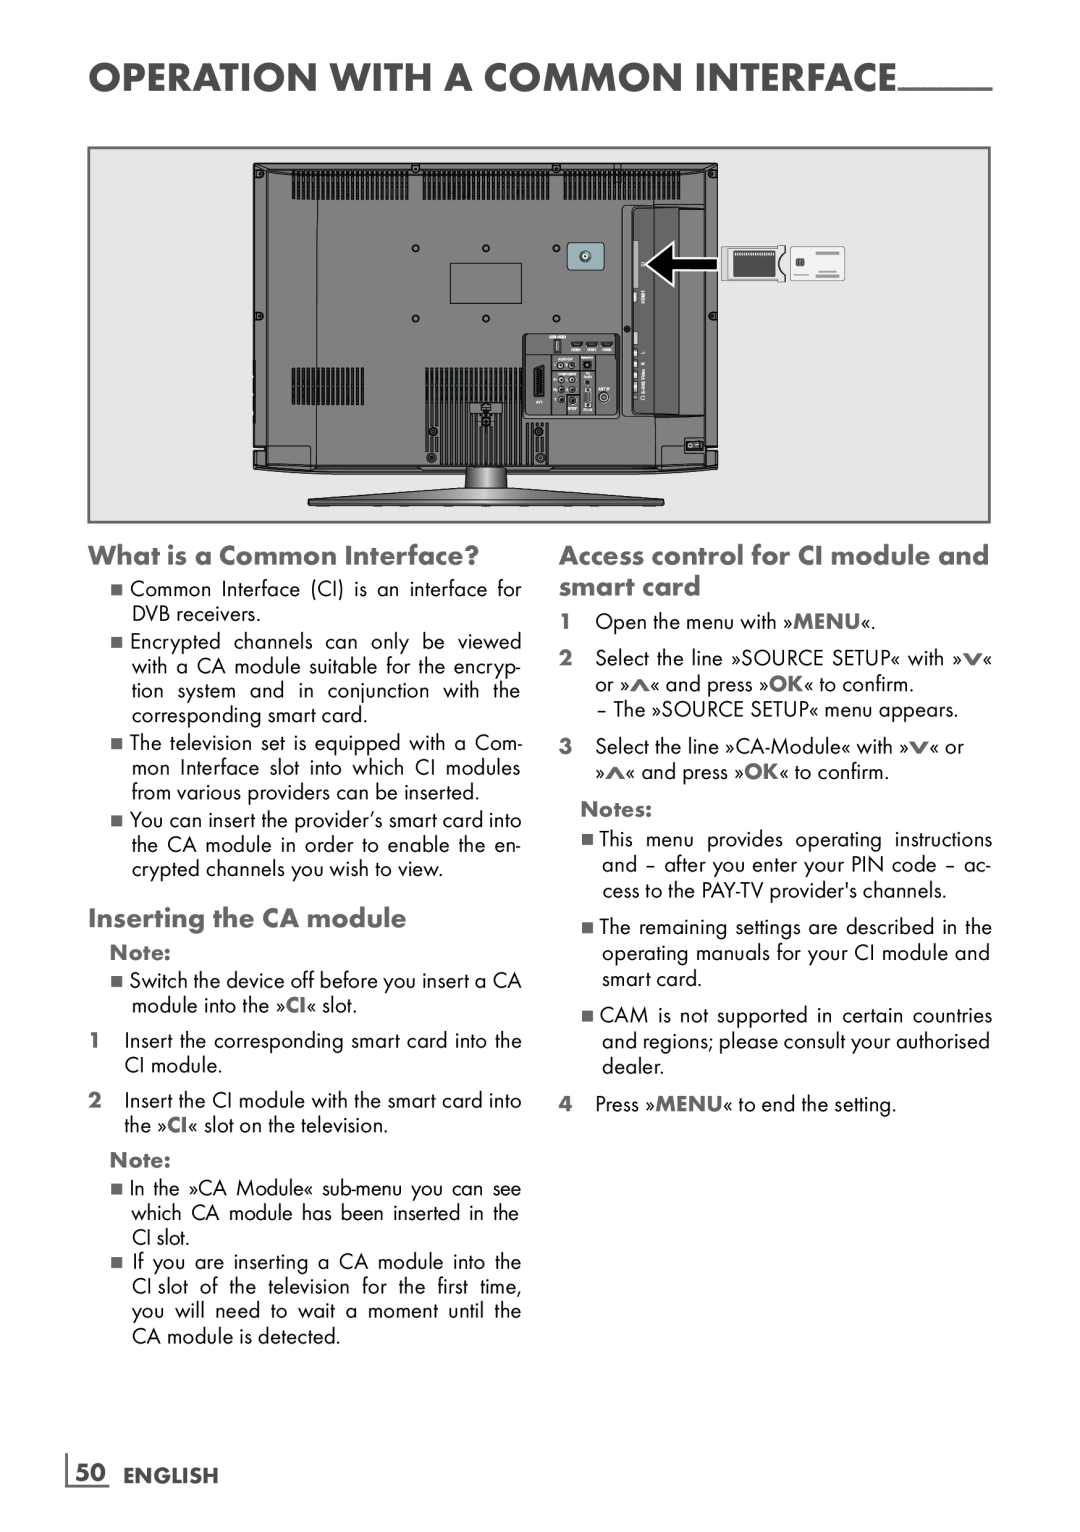 Grundig 42 VLS 9140 S What is a Common Interface?, Inserting the CA module, Access control for CI module and smart card 